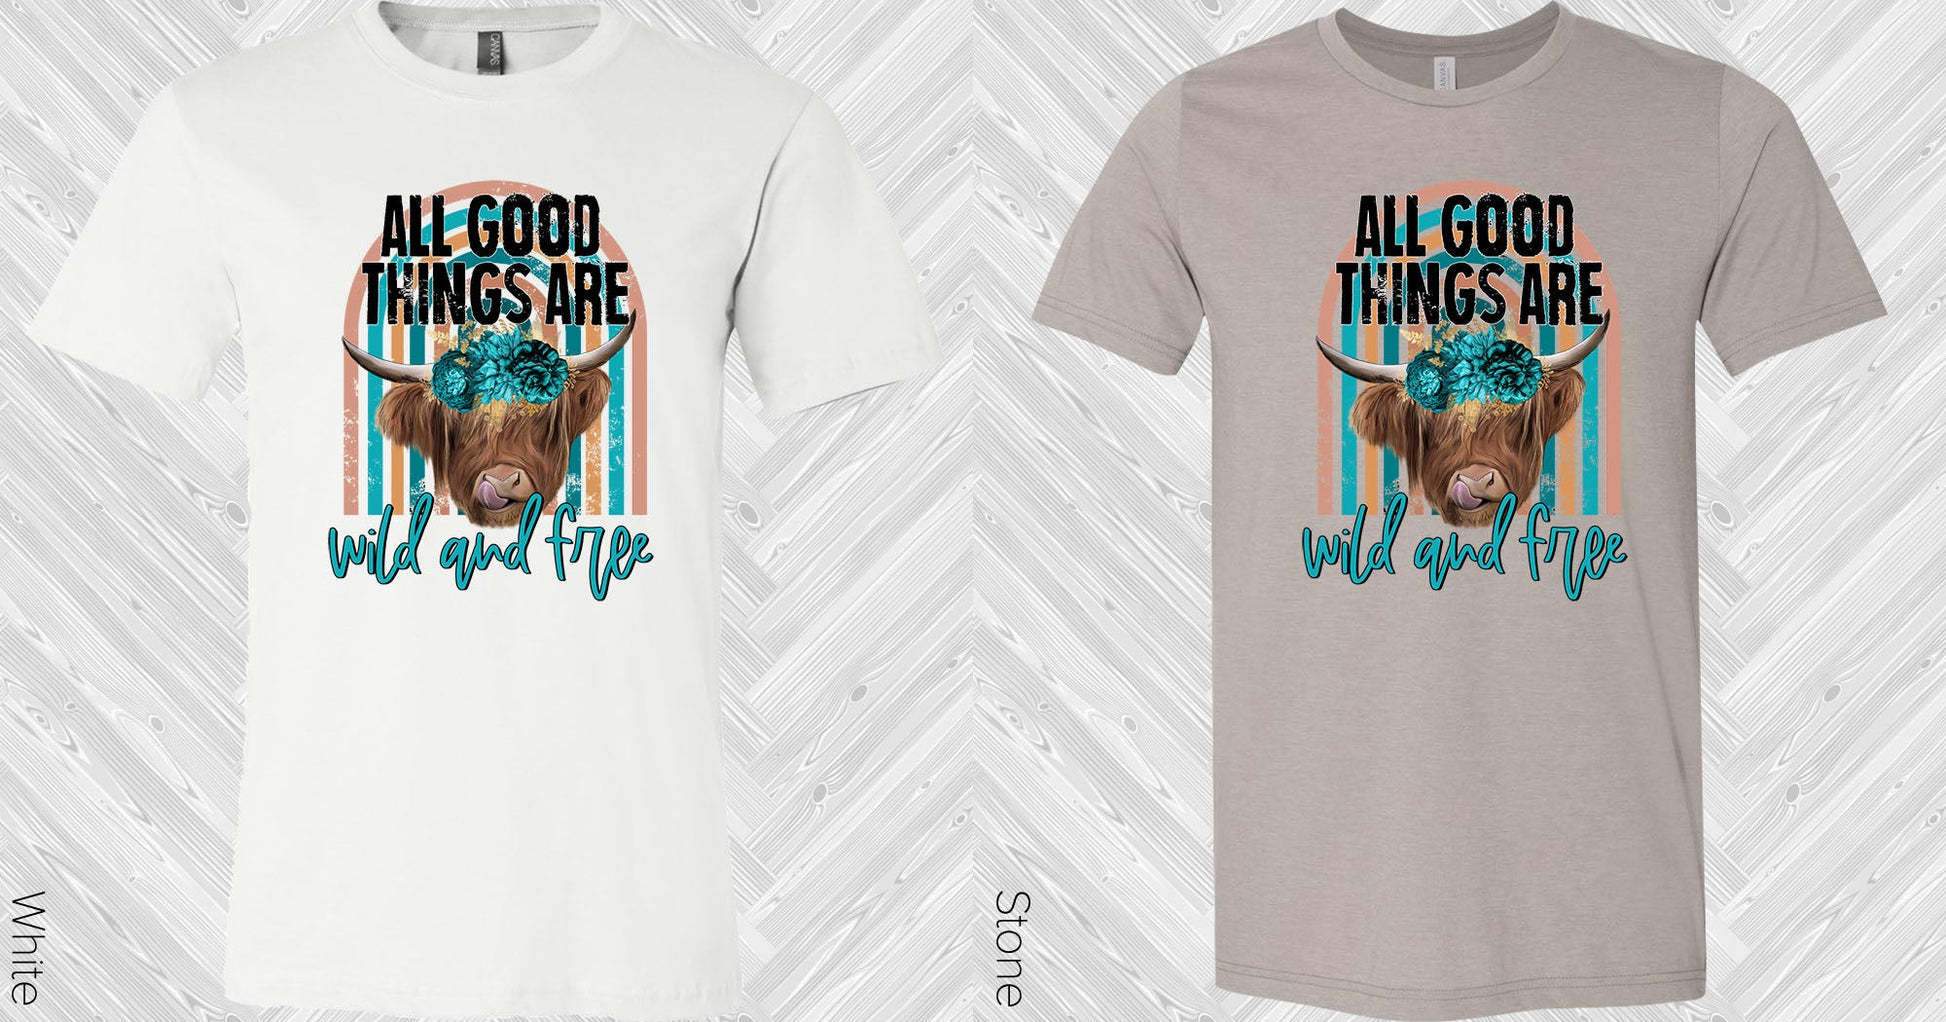 All Good Things Are Wild And Free Graphic Tee Graphic Tee